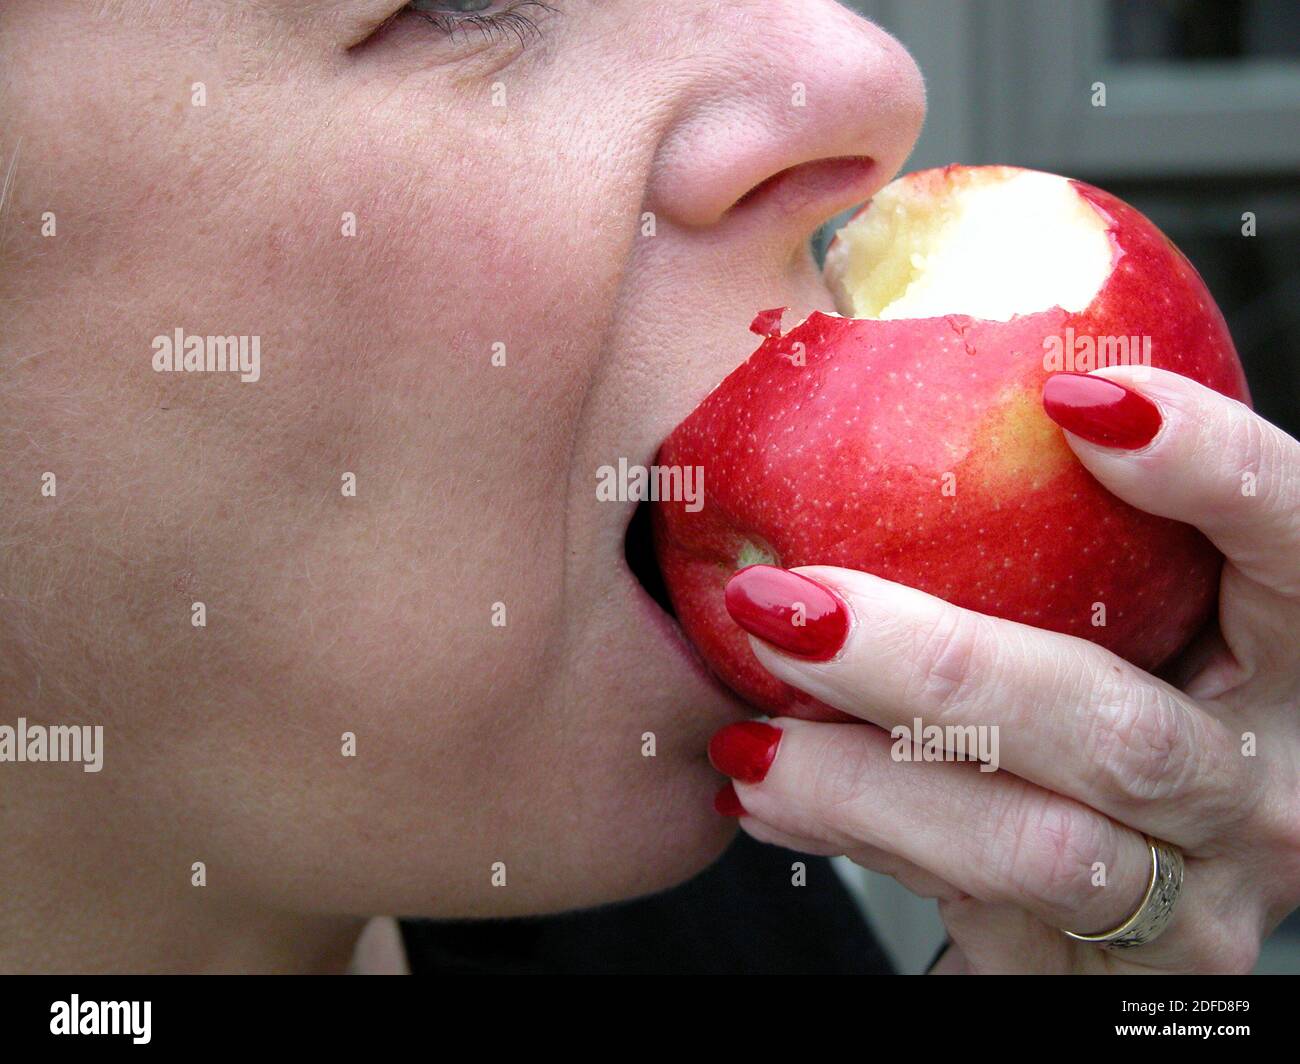 Woman taking a bite from a red delicious apple Stock Photo